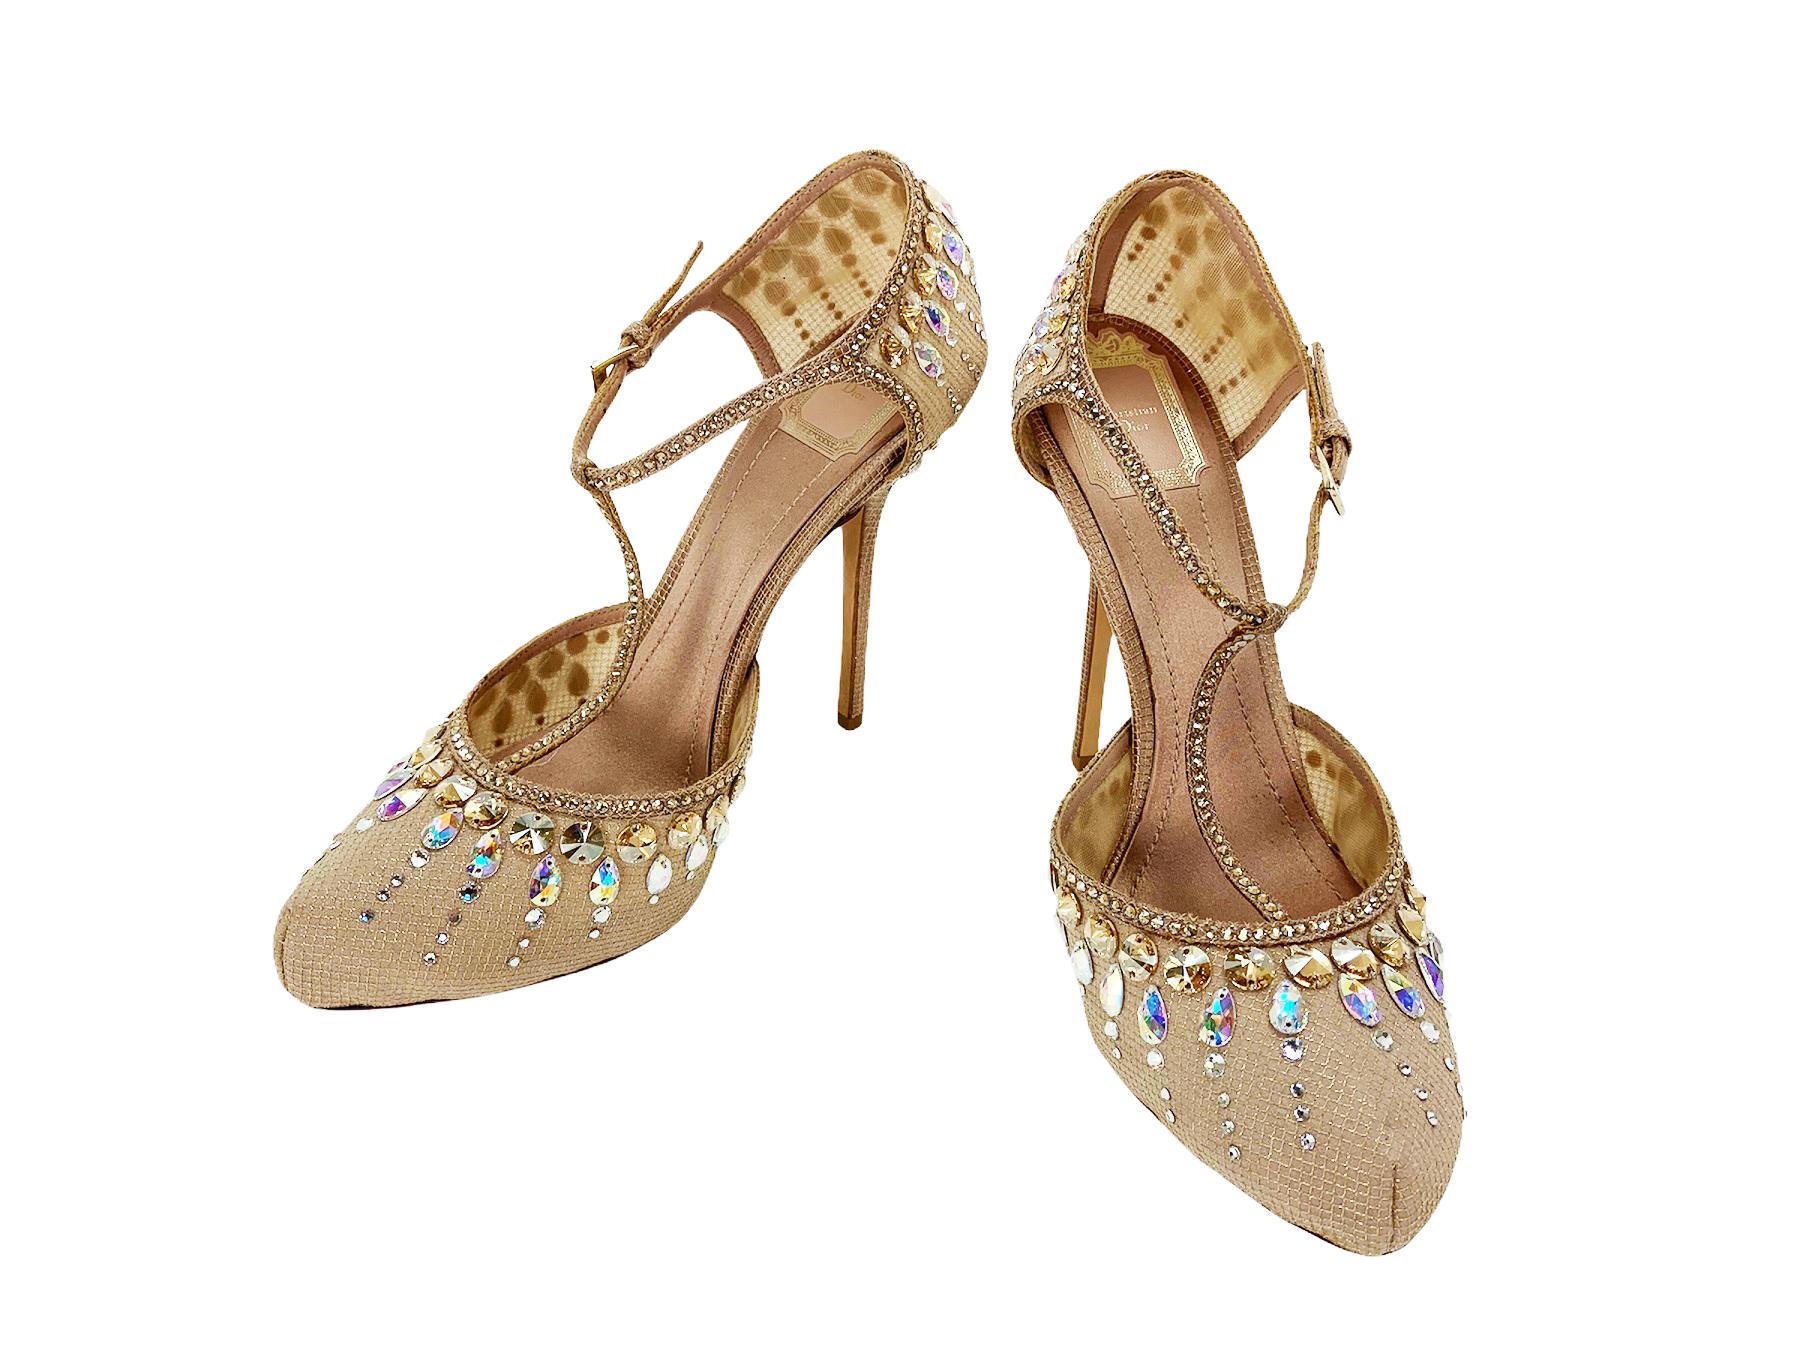 New Christian Dior Crystal Embellished T-strap Shoes Pumps
Designer size - 39.5
Nude Upper Glitter Fabric with Mesh Lining, Finished with Several Shapes of Crystals, Satin Insole, Leather Sole, Buckle Closure.
Heel Height - 5 inches, Hidden Platform